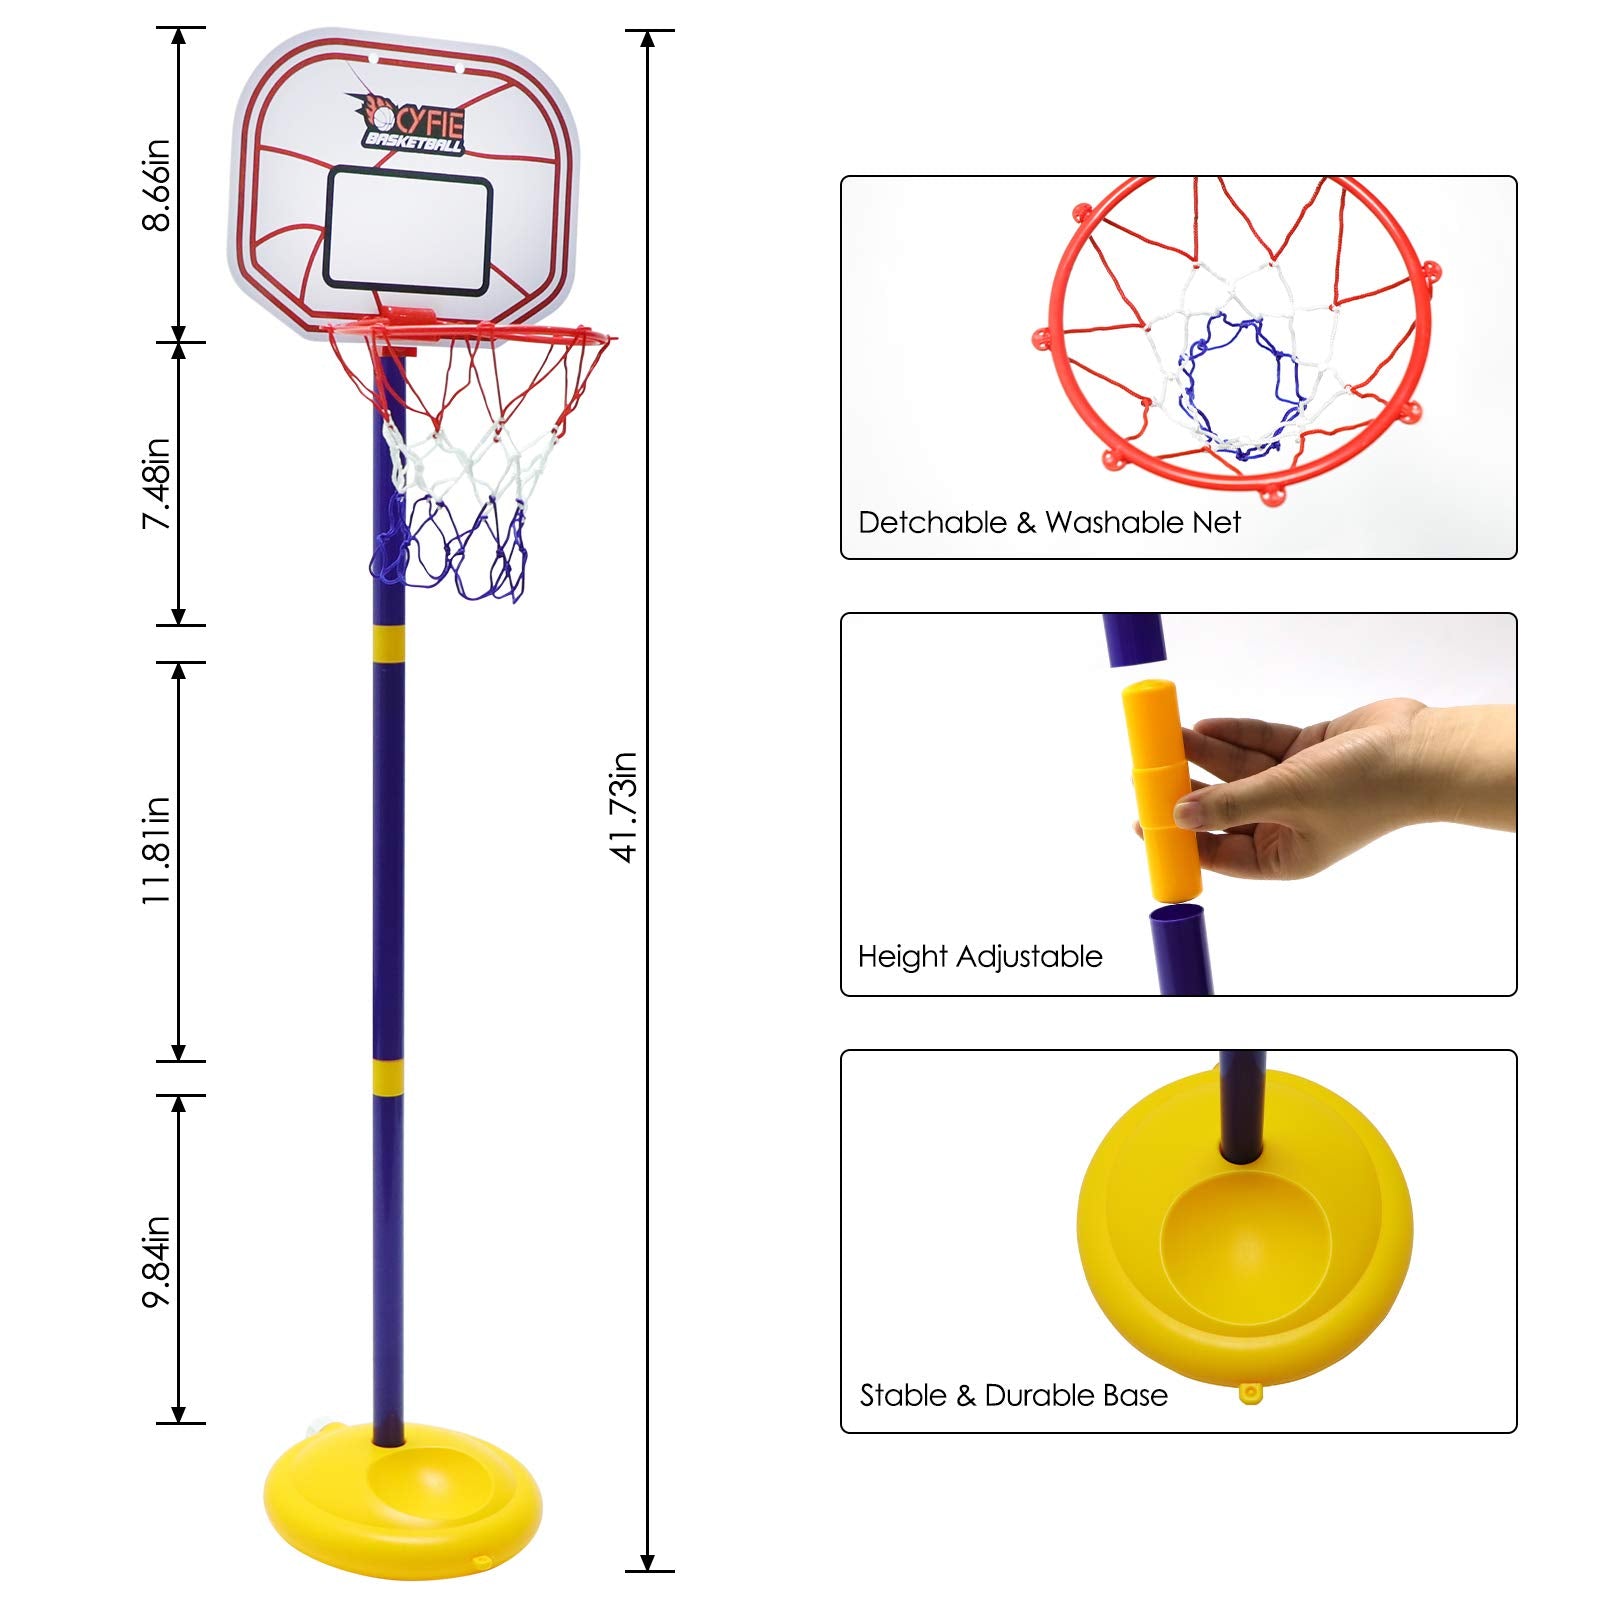 Cyfie Indoor Basketball Hoop for Toddlers Kids, 2.26ft - 3.48ft Stand Adjustable Height Basketball Game Toys with Ball and Pump for Outdoor Outside Sports